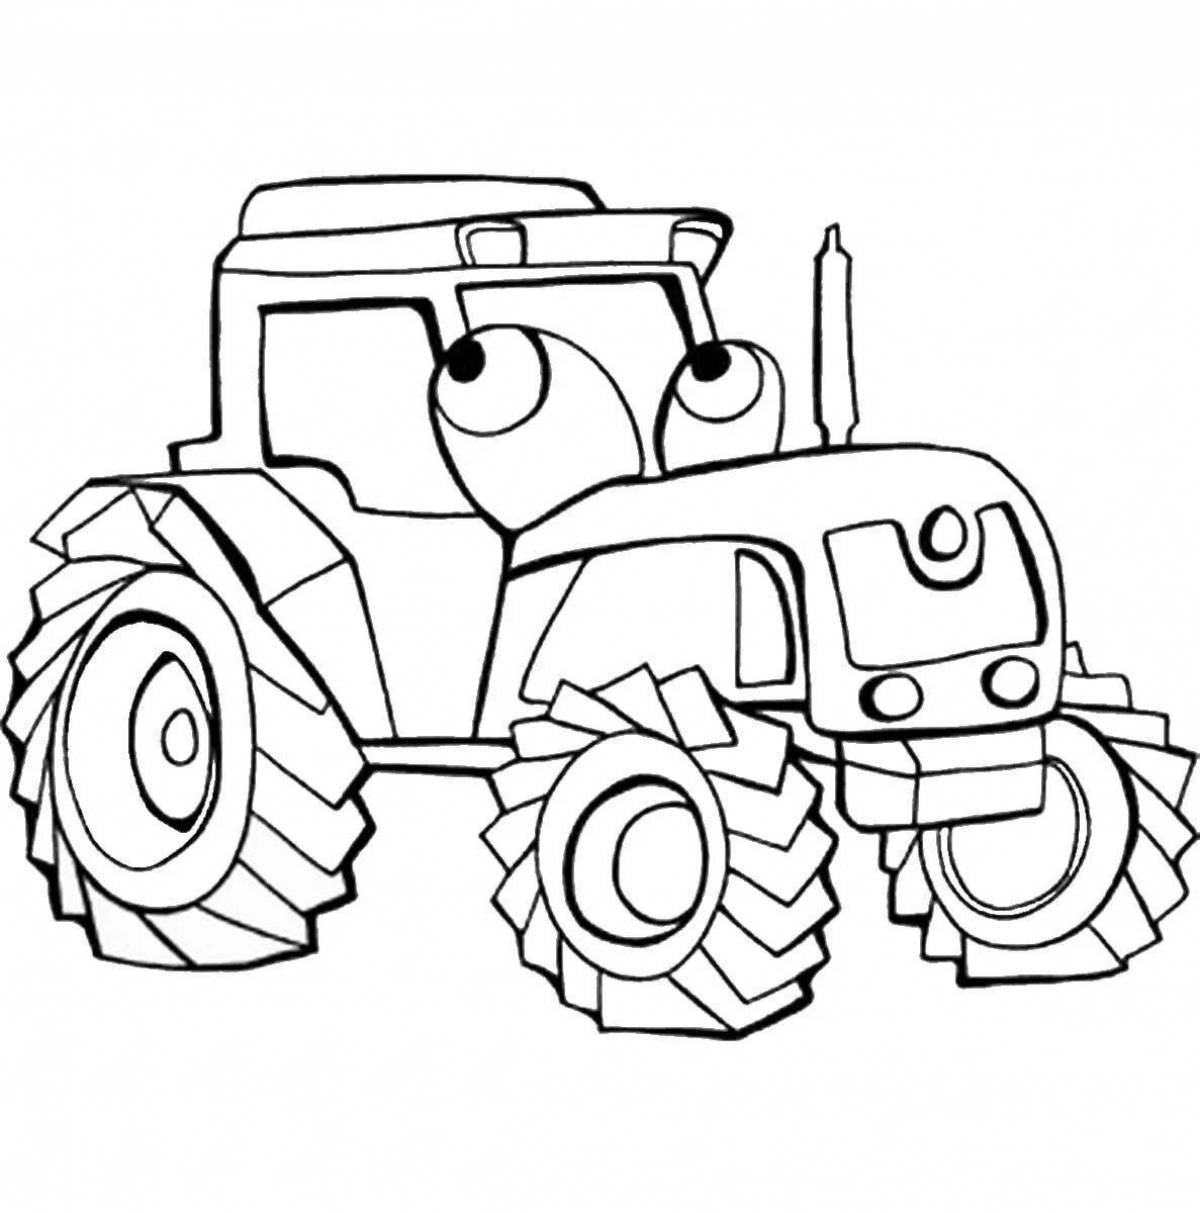 Cute tractor coloring book for kids